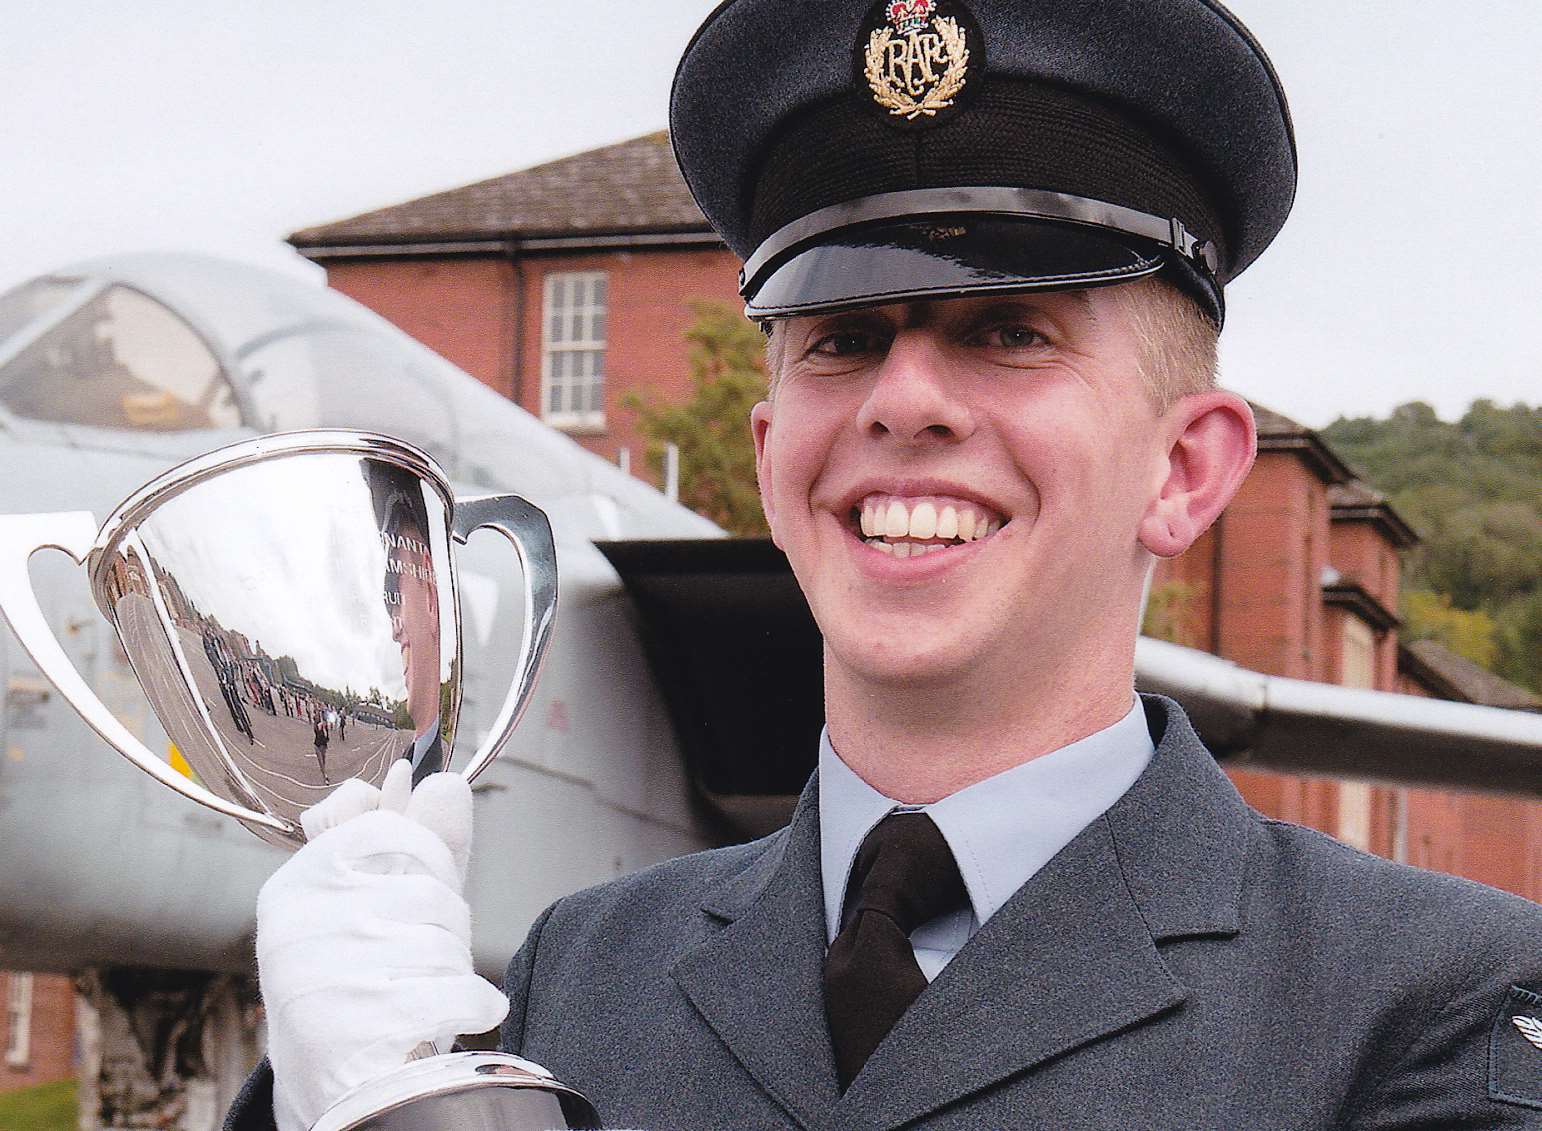 Stirling Harden, now aged 23, is in the RAF